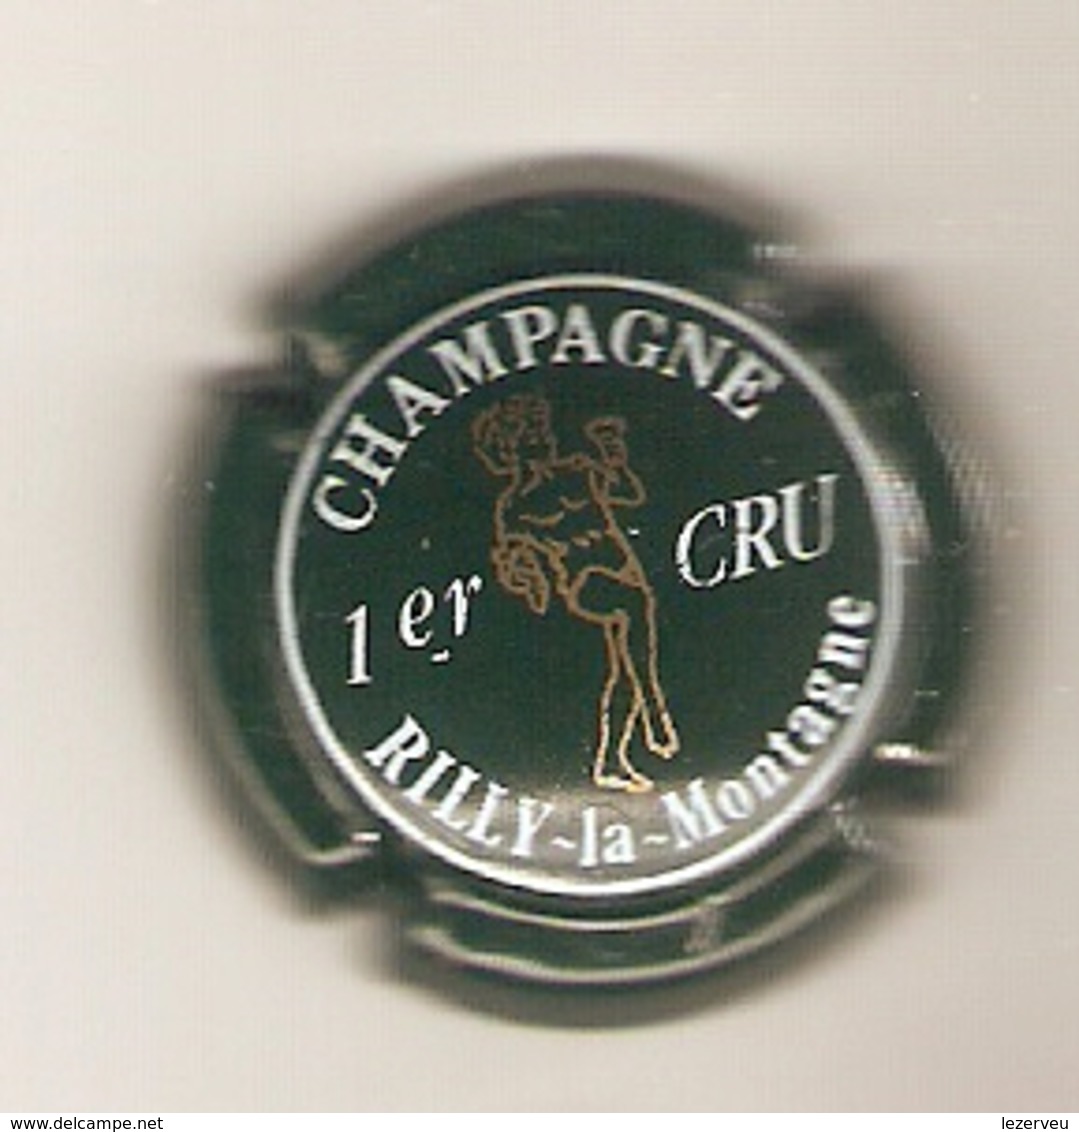 CAPSULE MUSELET CHAMPAGNE  RILLY LA MONTAGNE  1° CRU CAPSULE SUPERBE - Rilly La Montagne